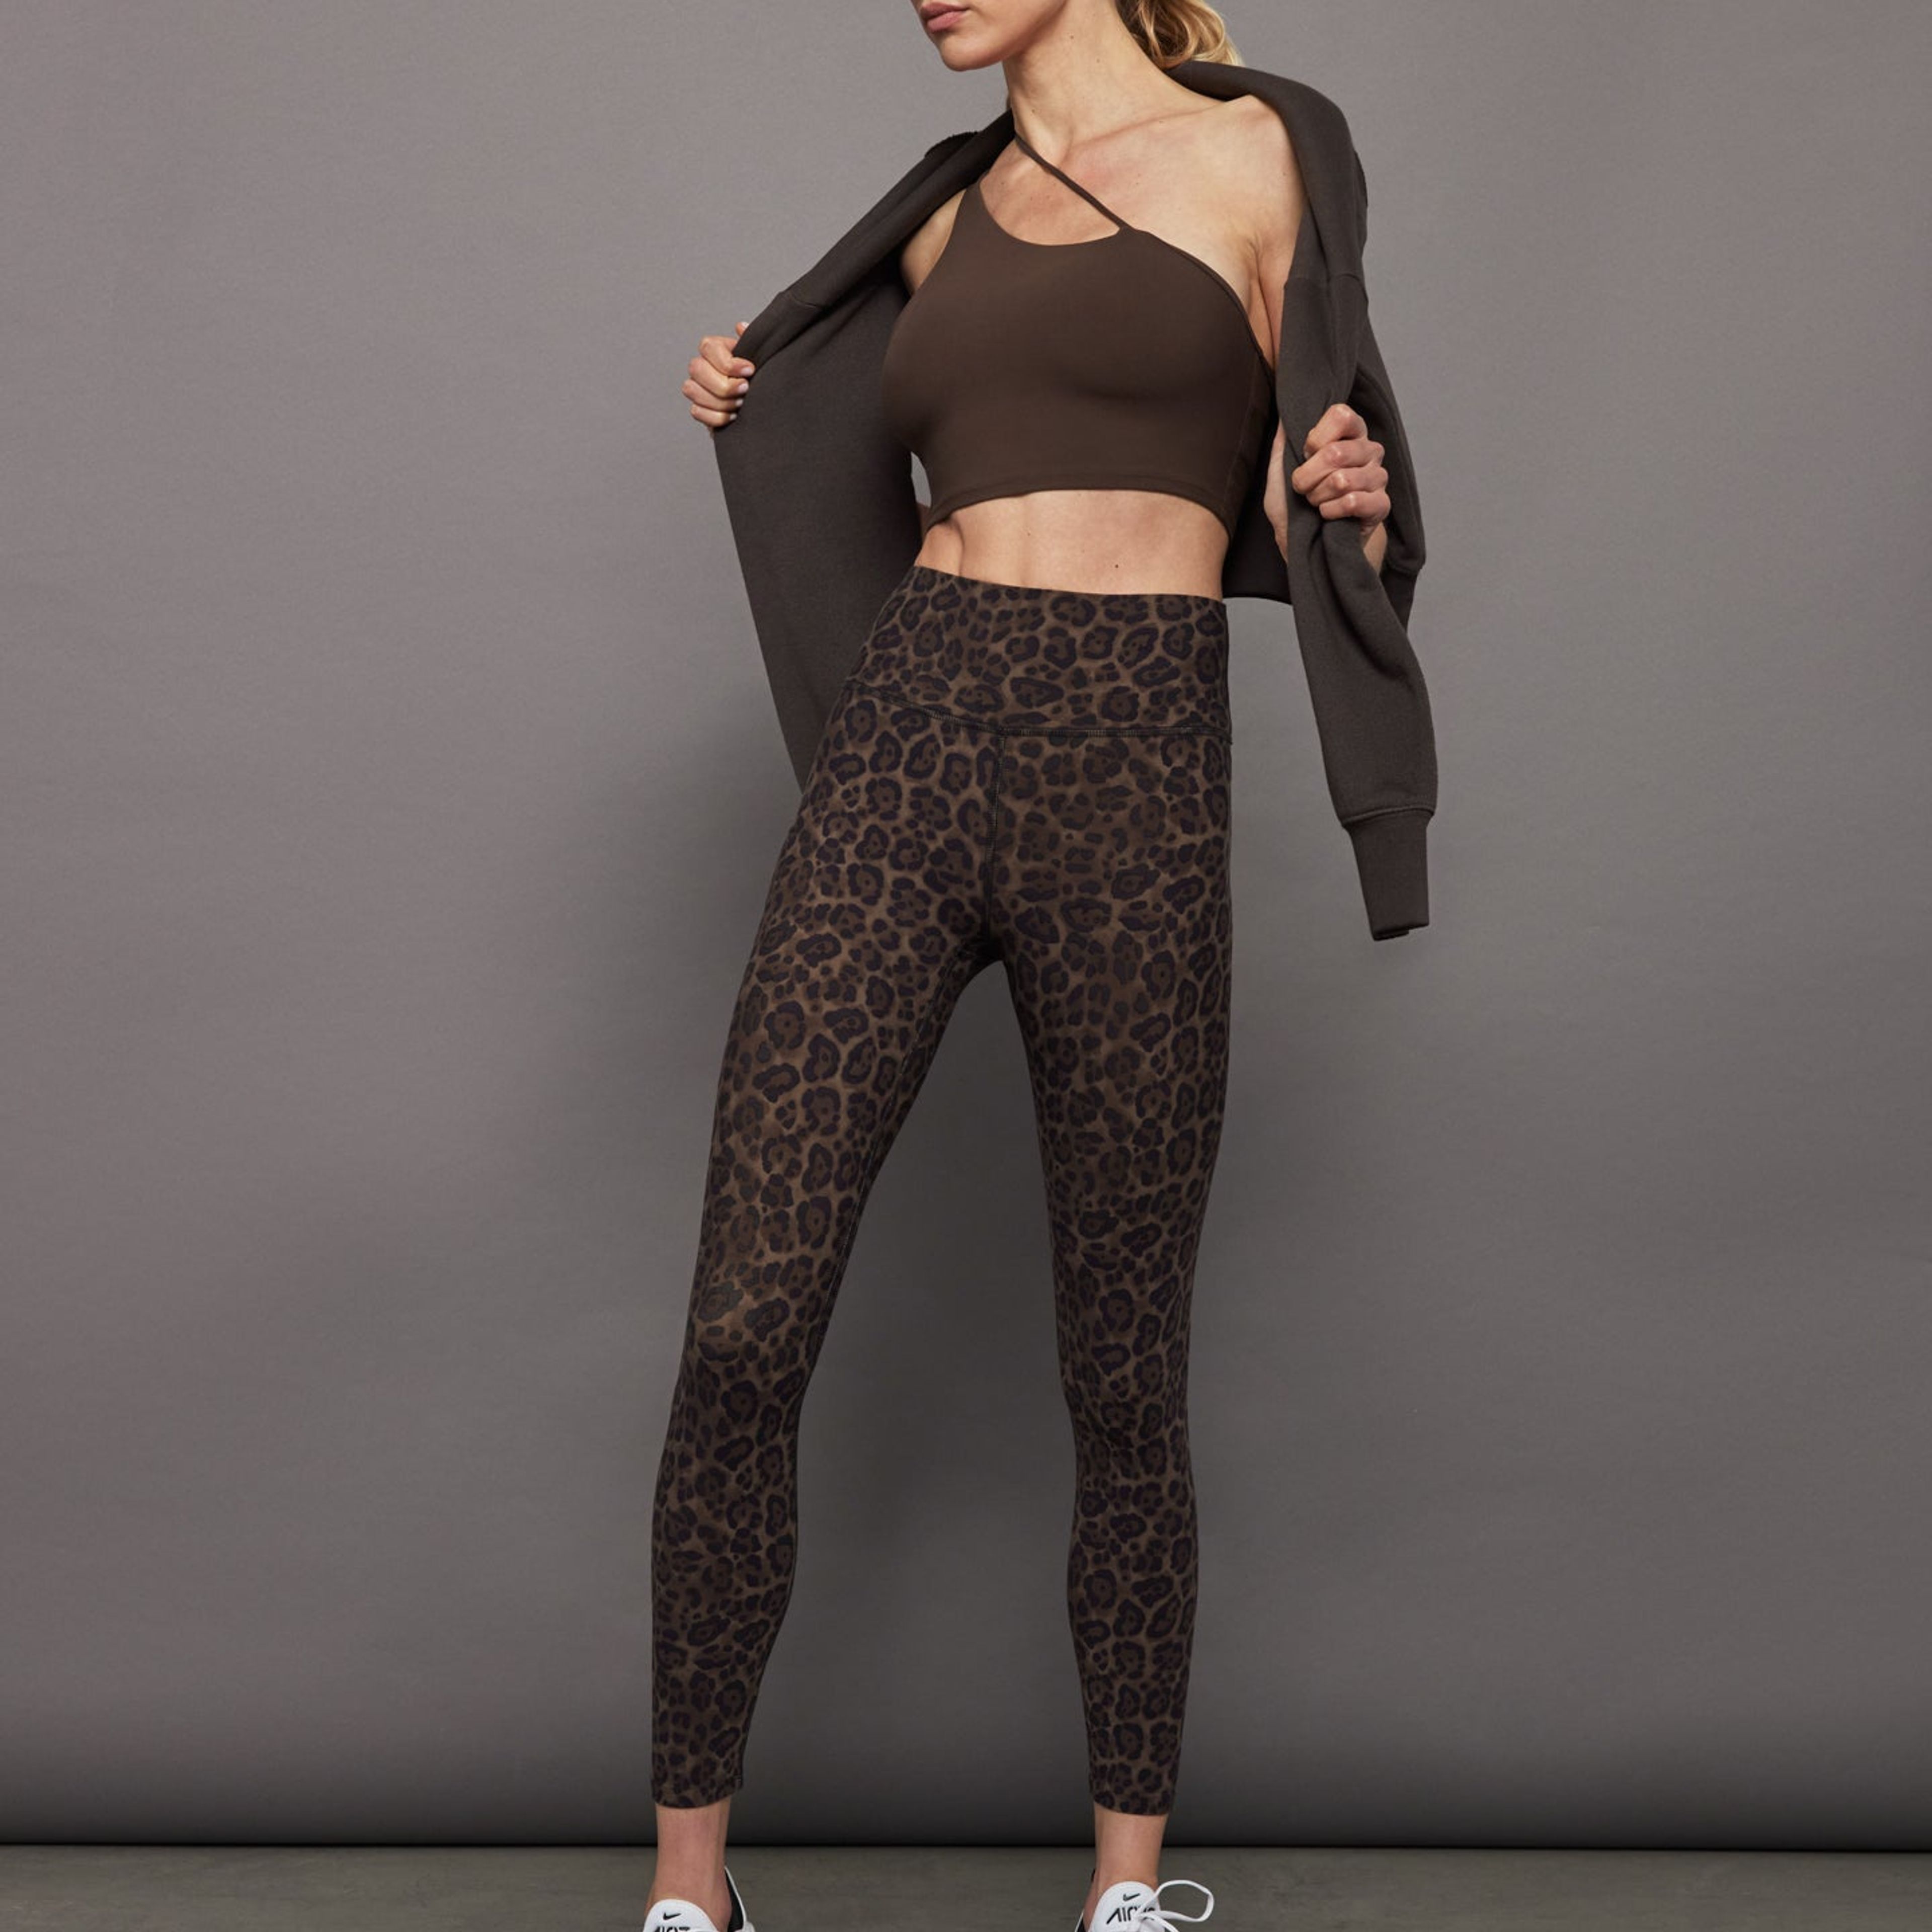 https://cdn.prod.marmalade.co/products/3840x3840/filters:quality(80)/www.carbon38.com%2Fproducts%2Fhigh-rise-full-lenght-legging-in-melt-leopard-print%2F1687999739%2FCARB-YD165-PRNTLEO-23SM-High-Rise-Full-Length-Legging-in-Melt-color-Leopard-Print_30509-Edit.jpg